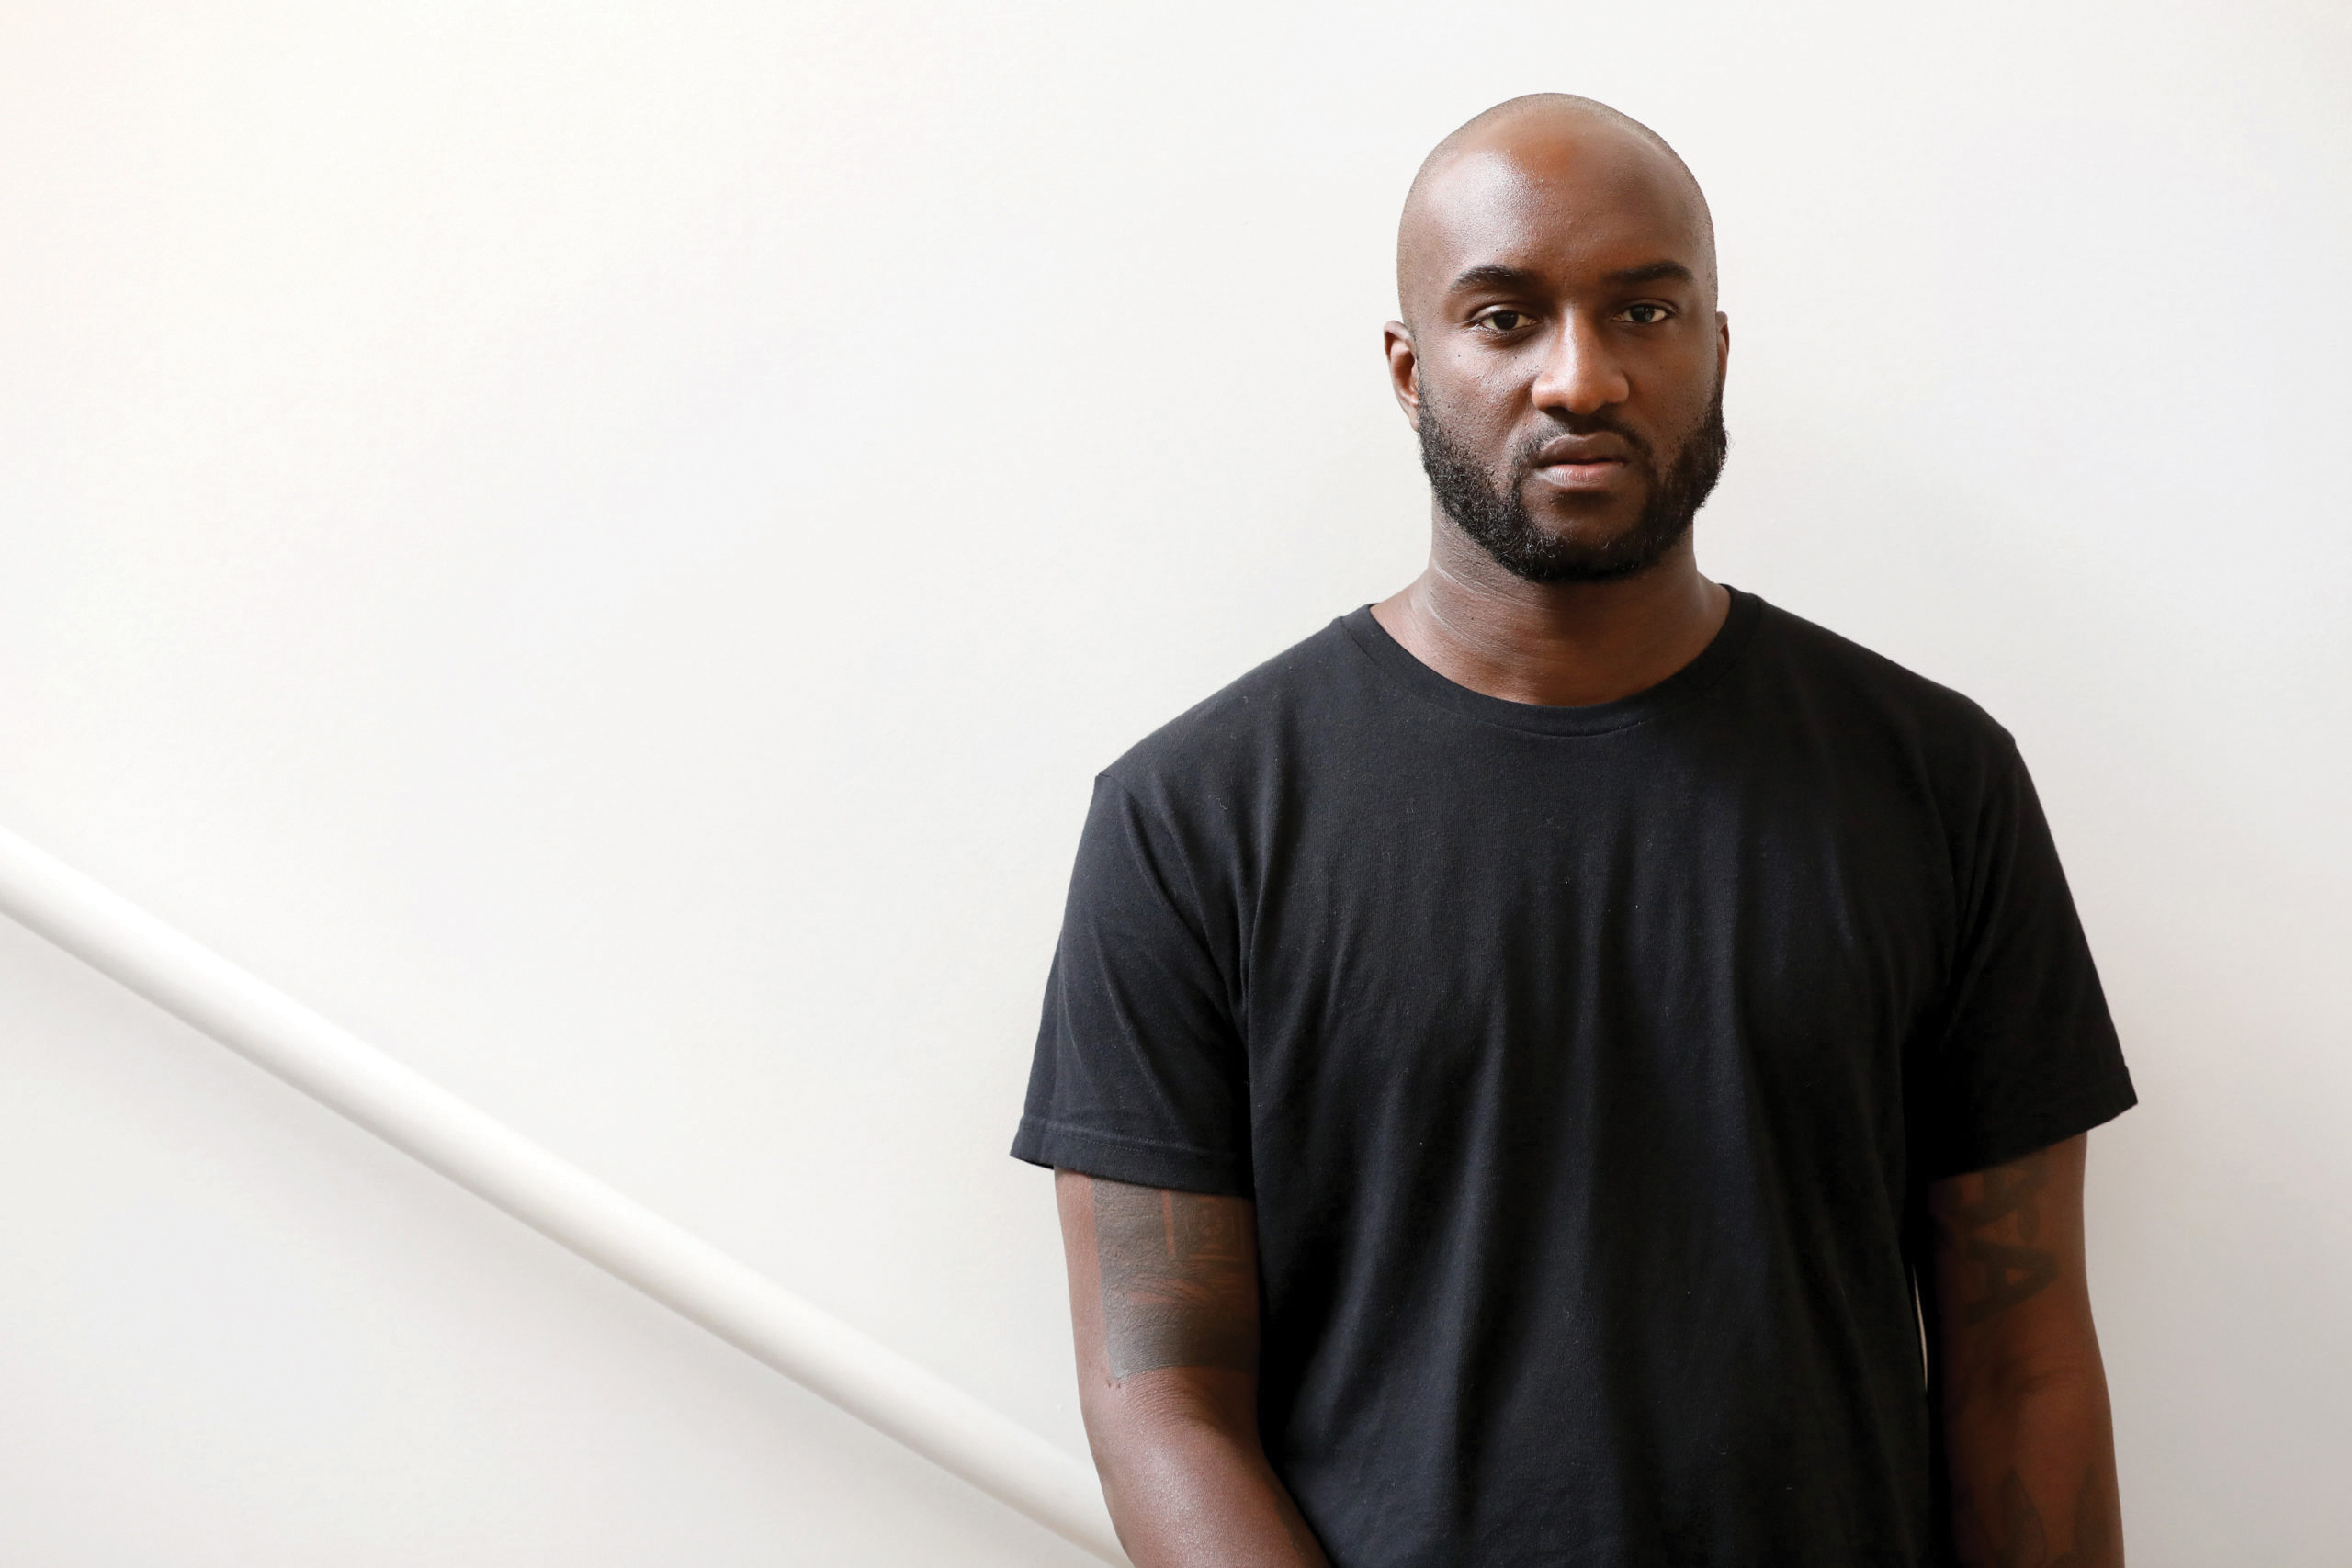 Manner designer Virgil Abloh dies of most cancers at 41 | Richmond Cost-free Press